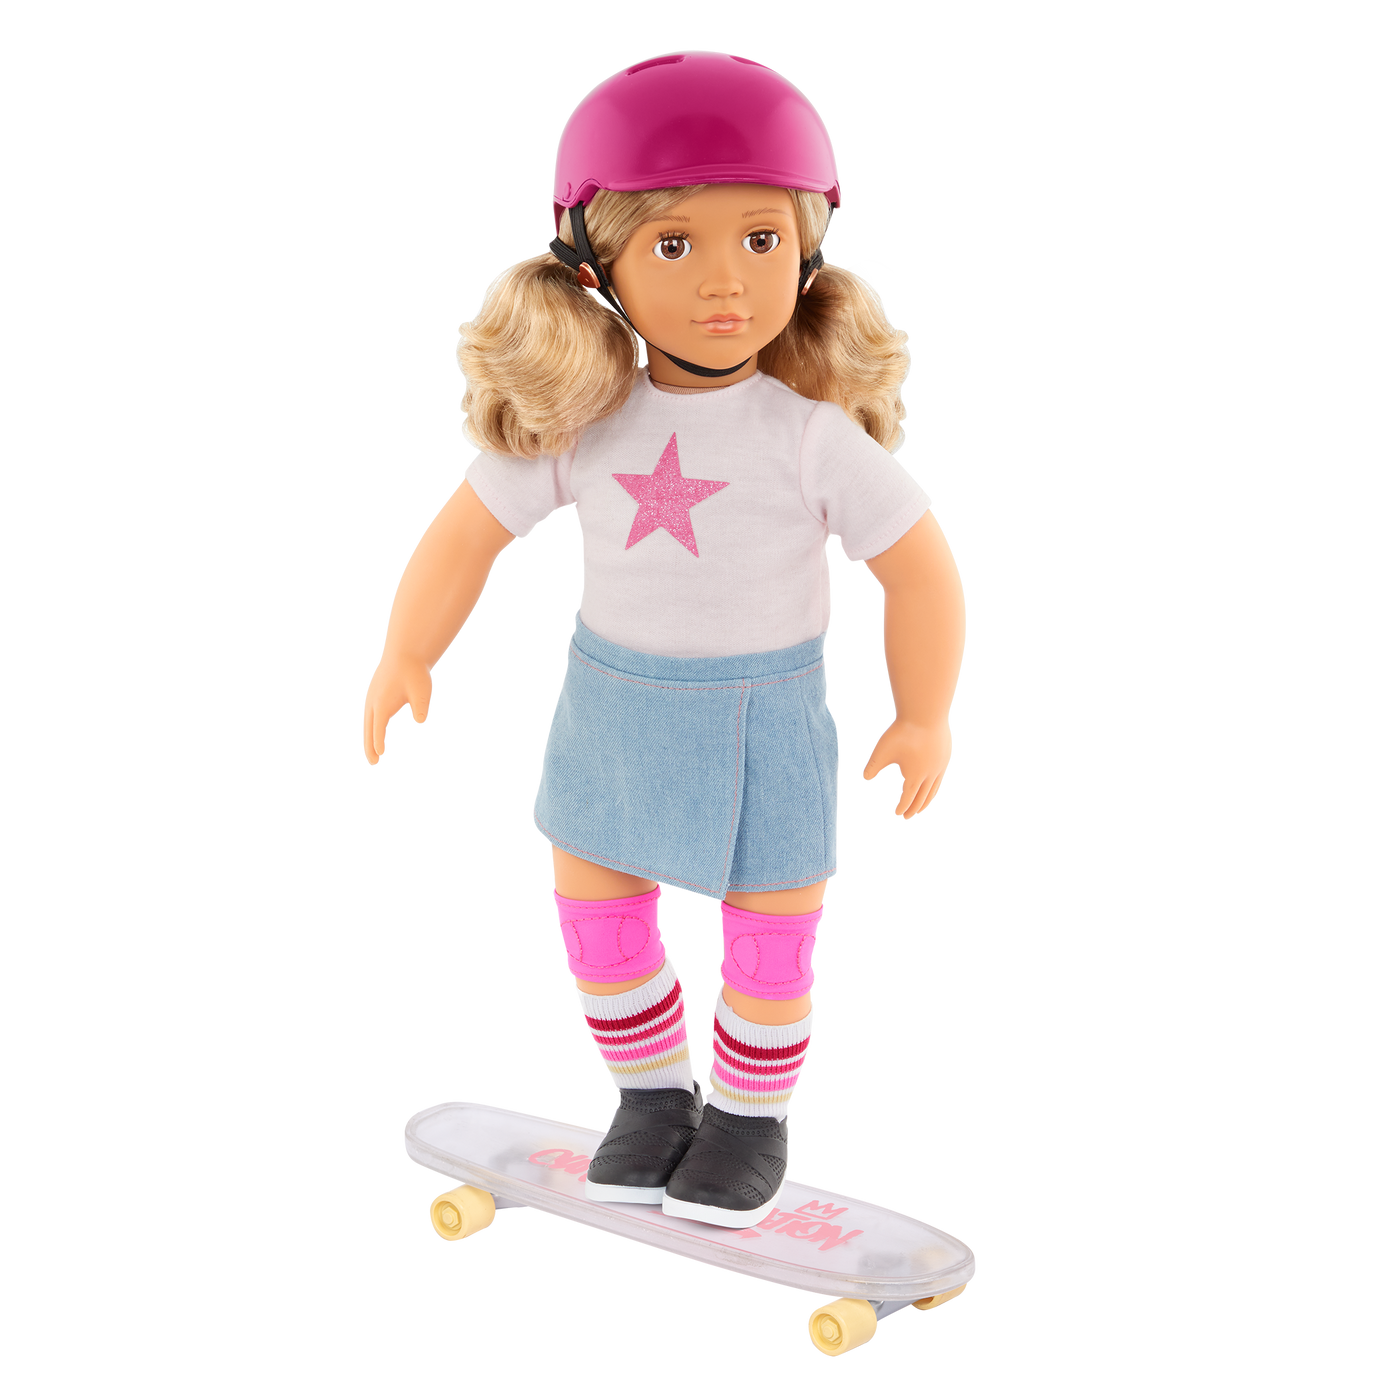 Our Generation Posable 18-inch Skateboarder Doll Ollie